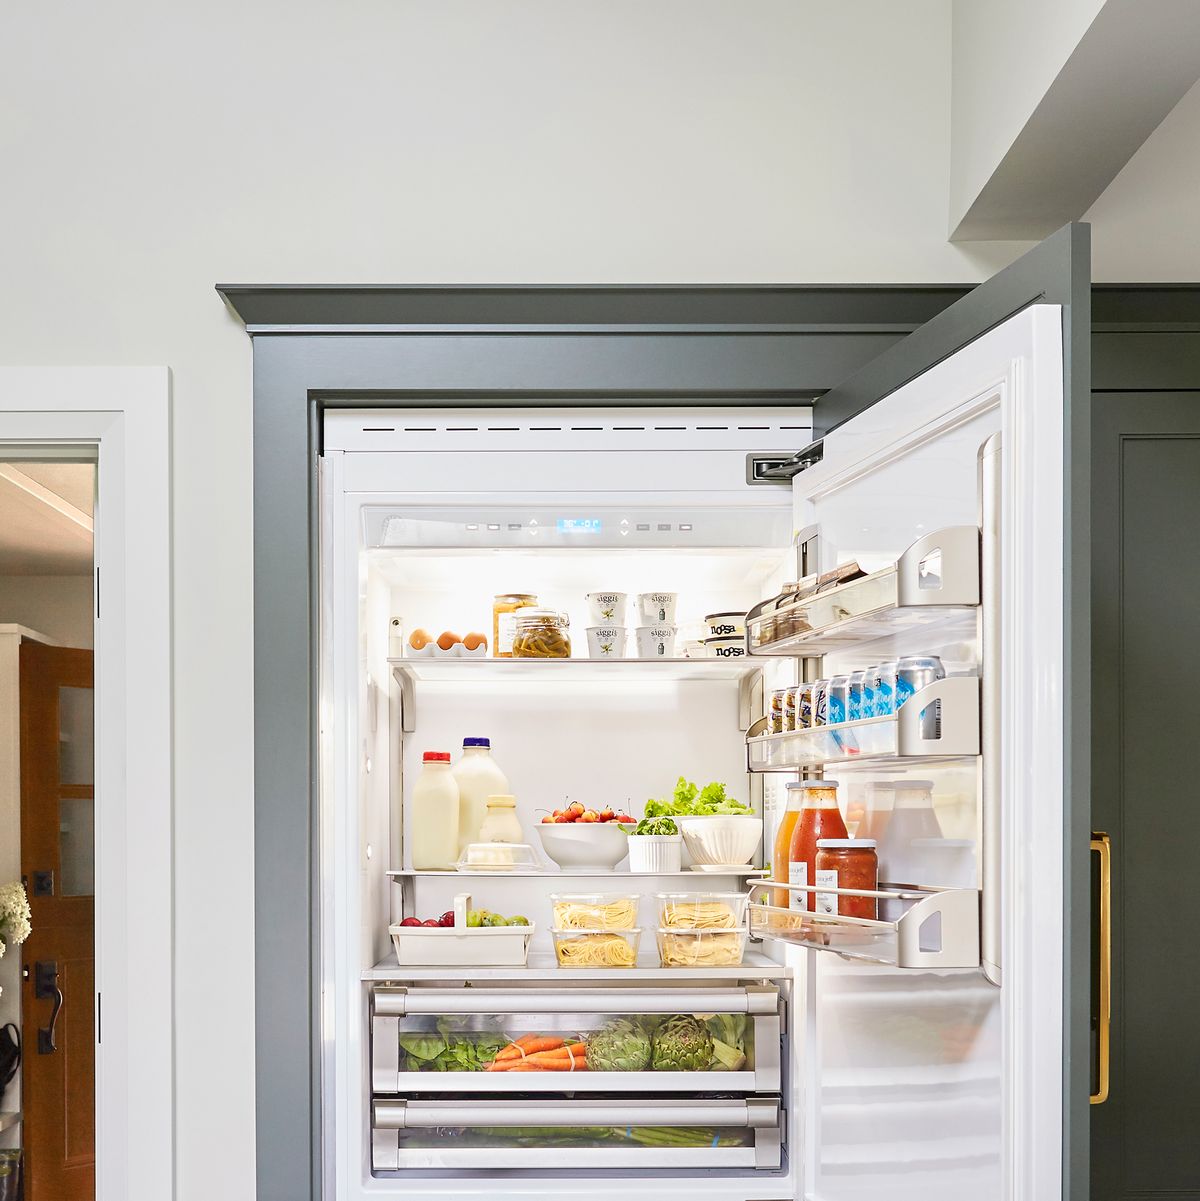 https://hips.hearstapps.com/hmg-prod/images/how-to-organize-a-fridge-designed-by-emily-henderson-design-photo-by-sara-tramp-38-1611349492.jpg?crop=0.998xw:0.800xh;0,0.121xh&resize=1200:*